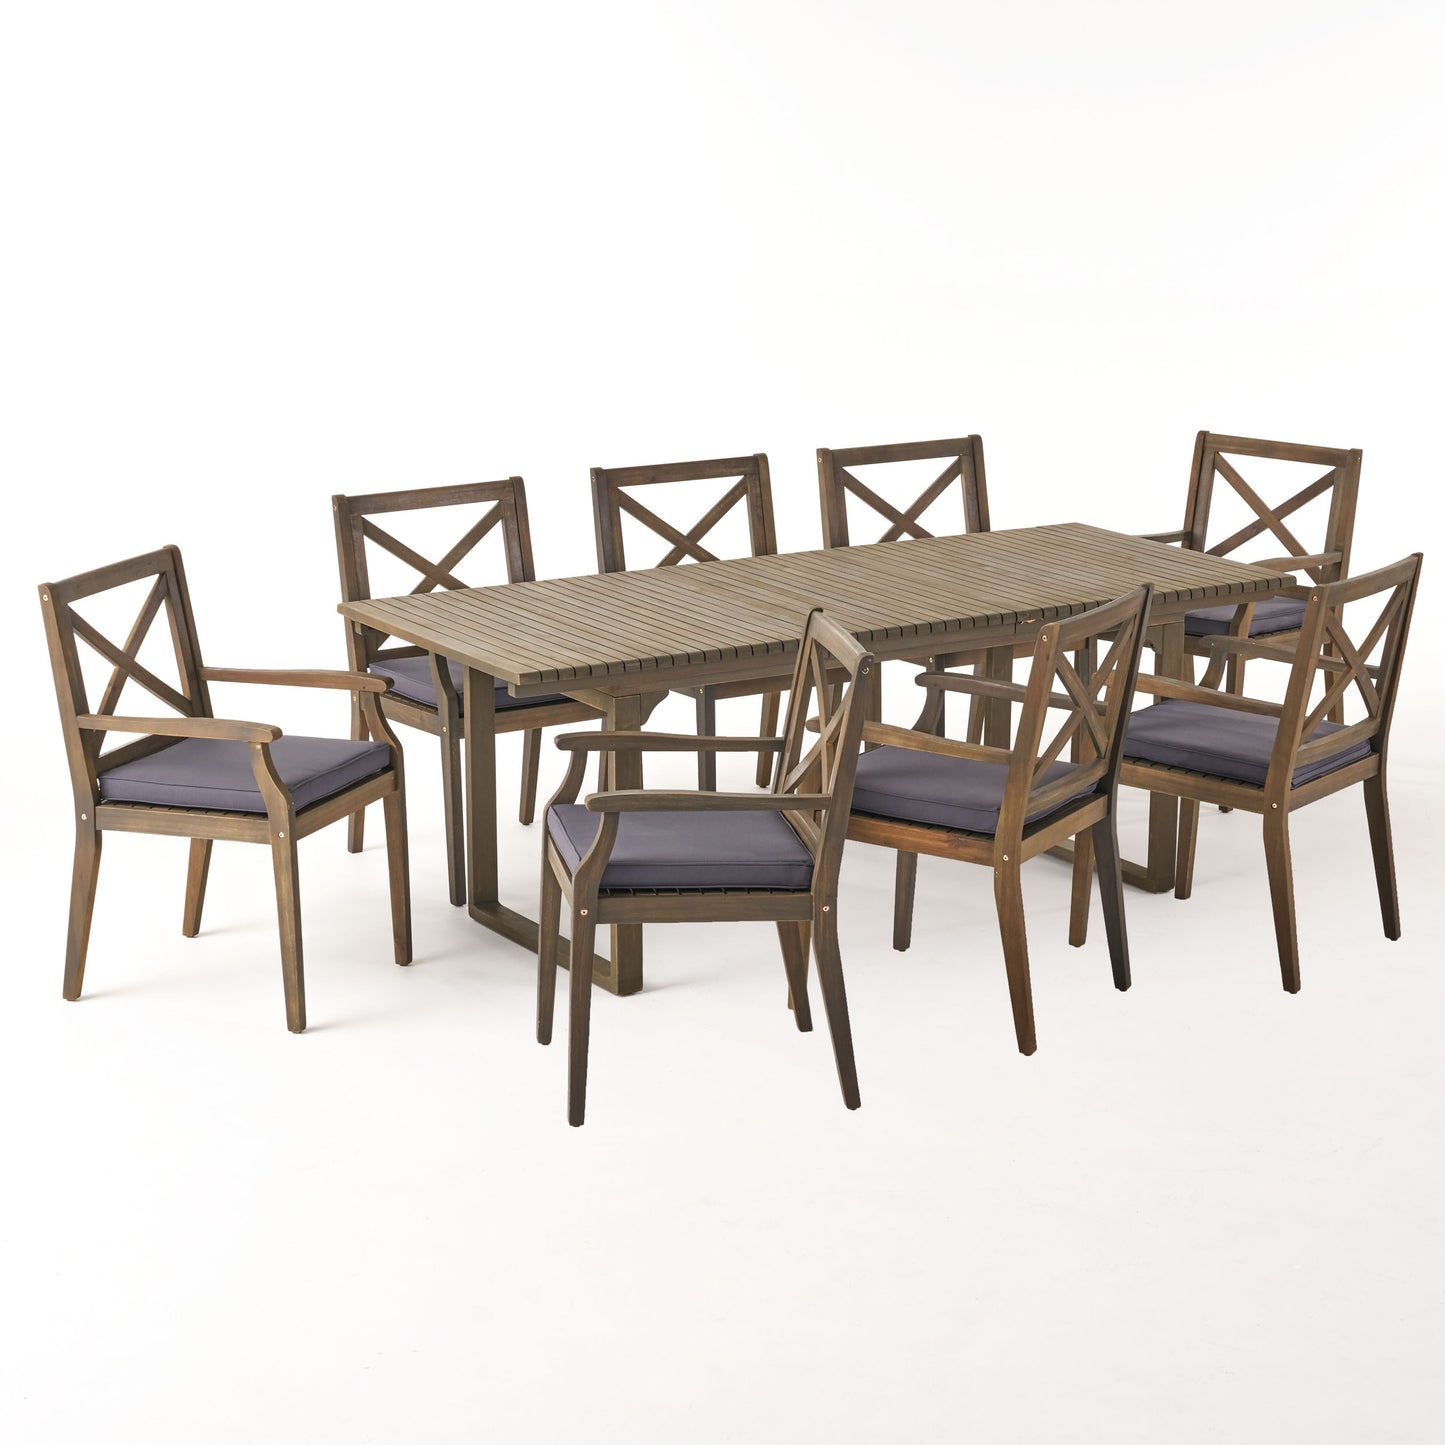 Estelle Outdoor 8 Seater Expandable Acacia Wood Dining Set